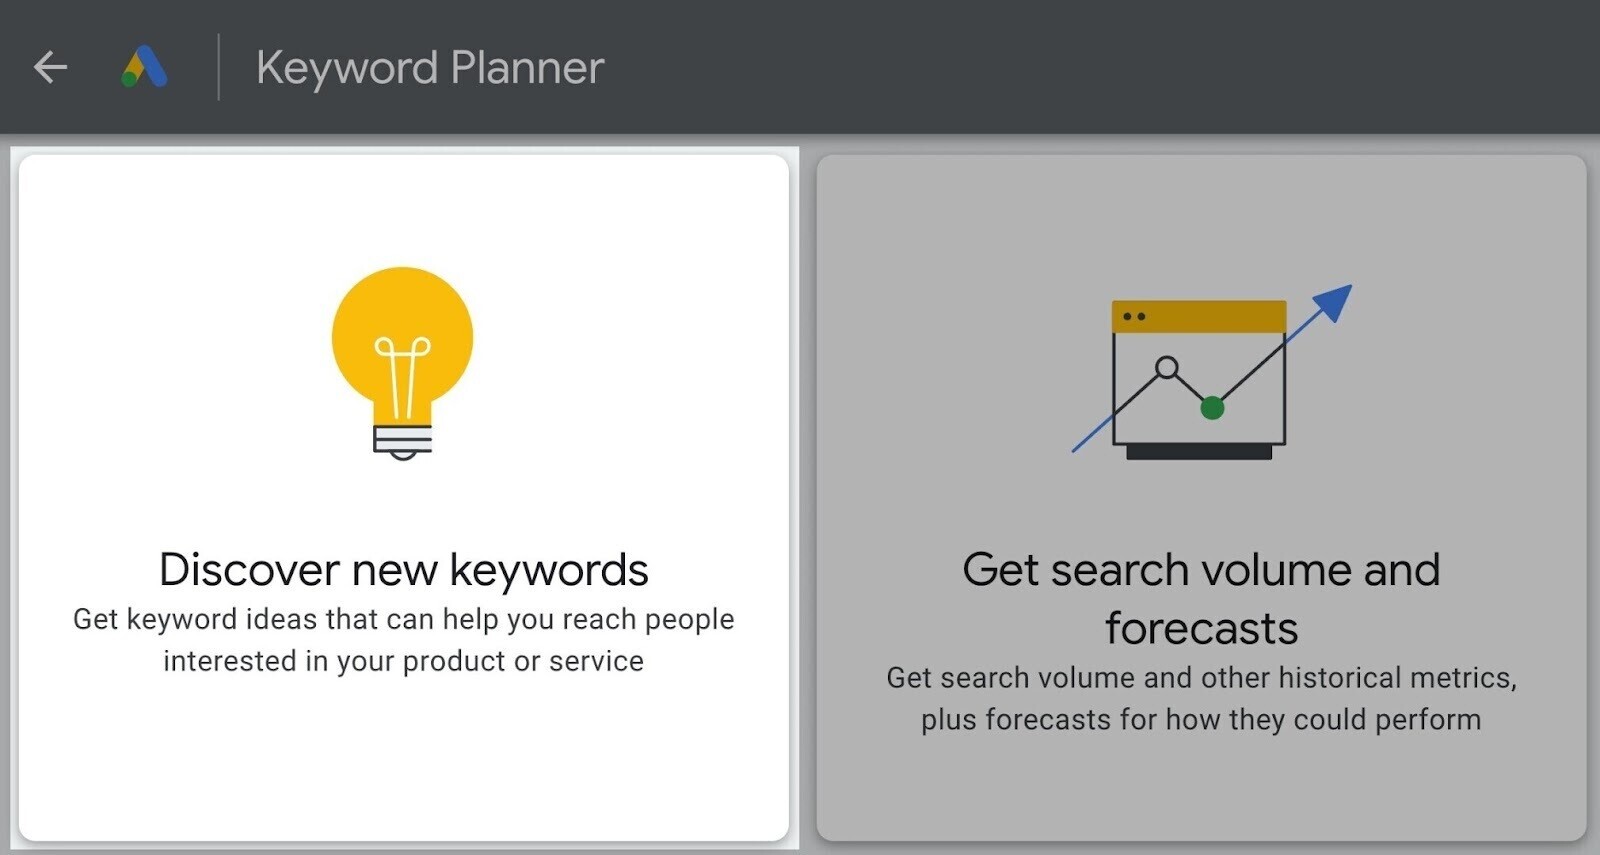 “Discover new keywords” section highlighted in Google Keyword Planner